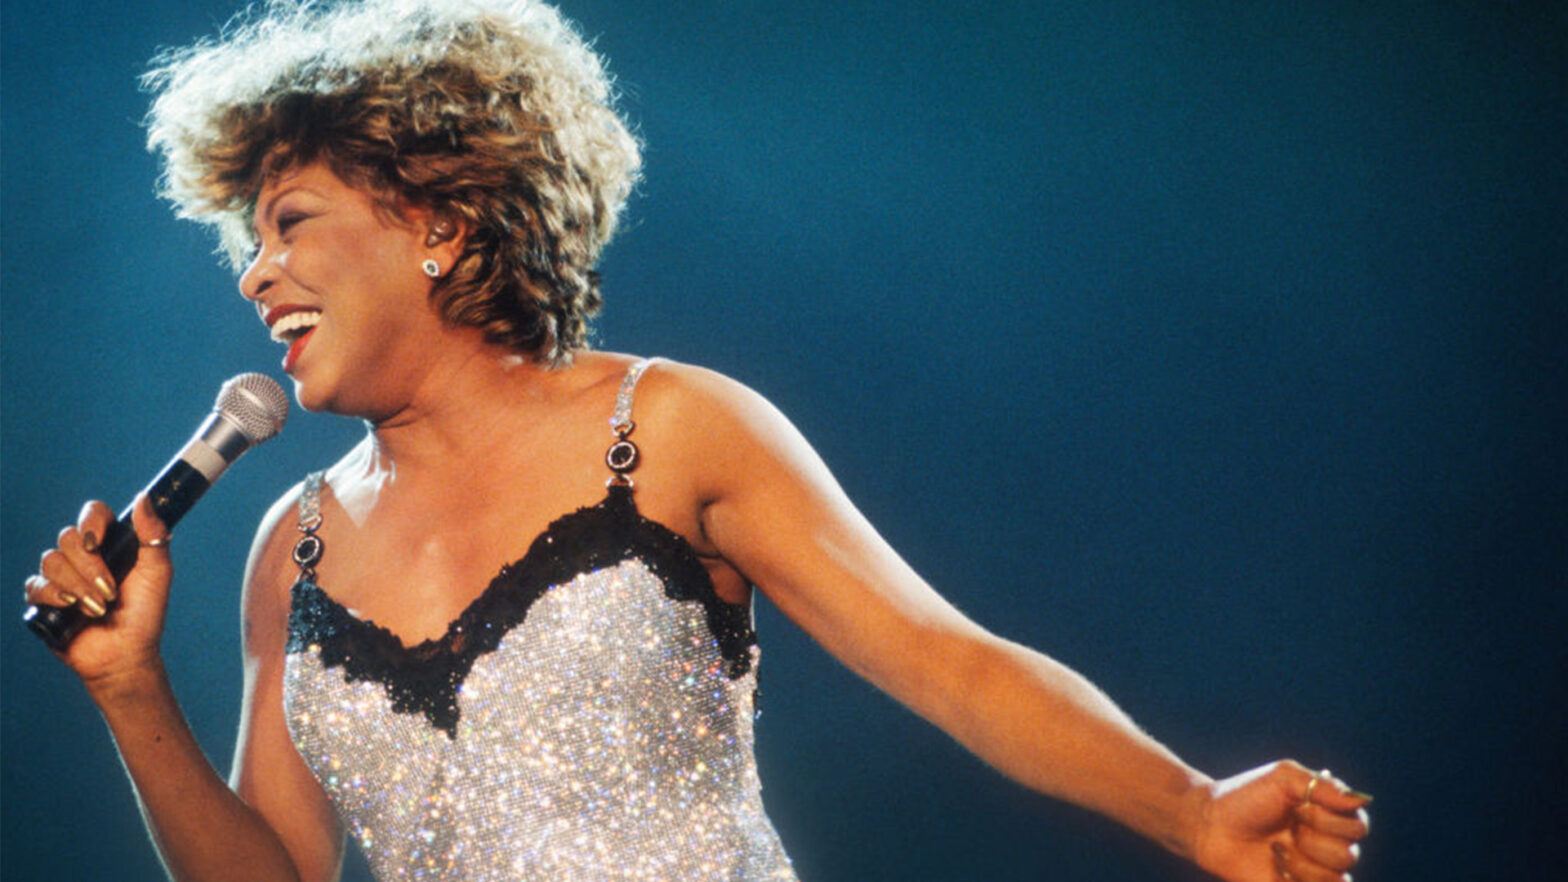 Prior To Her Passing, Rock And Roll Legend Tina Turner Sold Her Music Rights To Protect Her ‘Life’s Work’